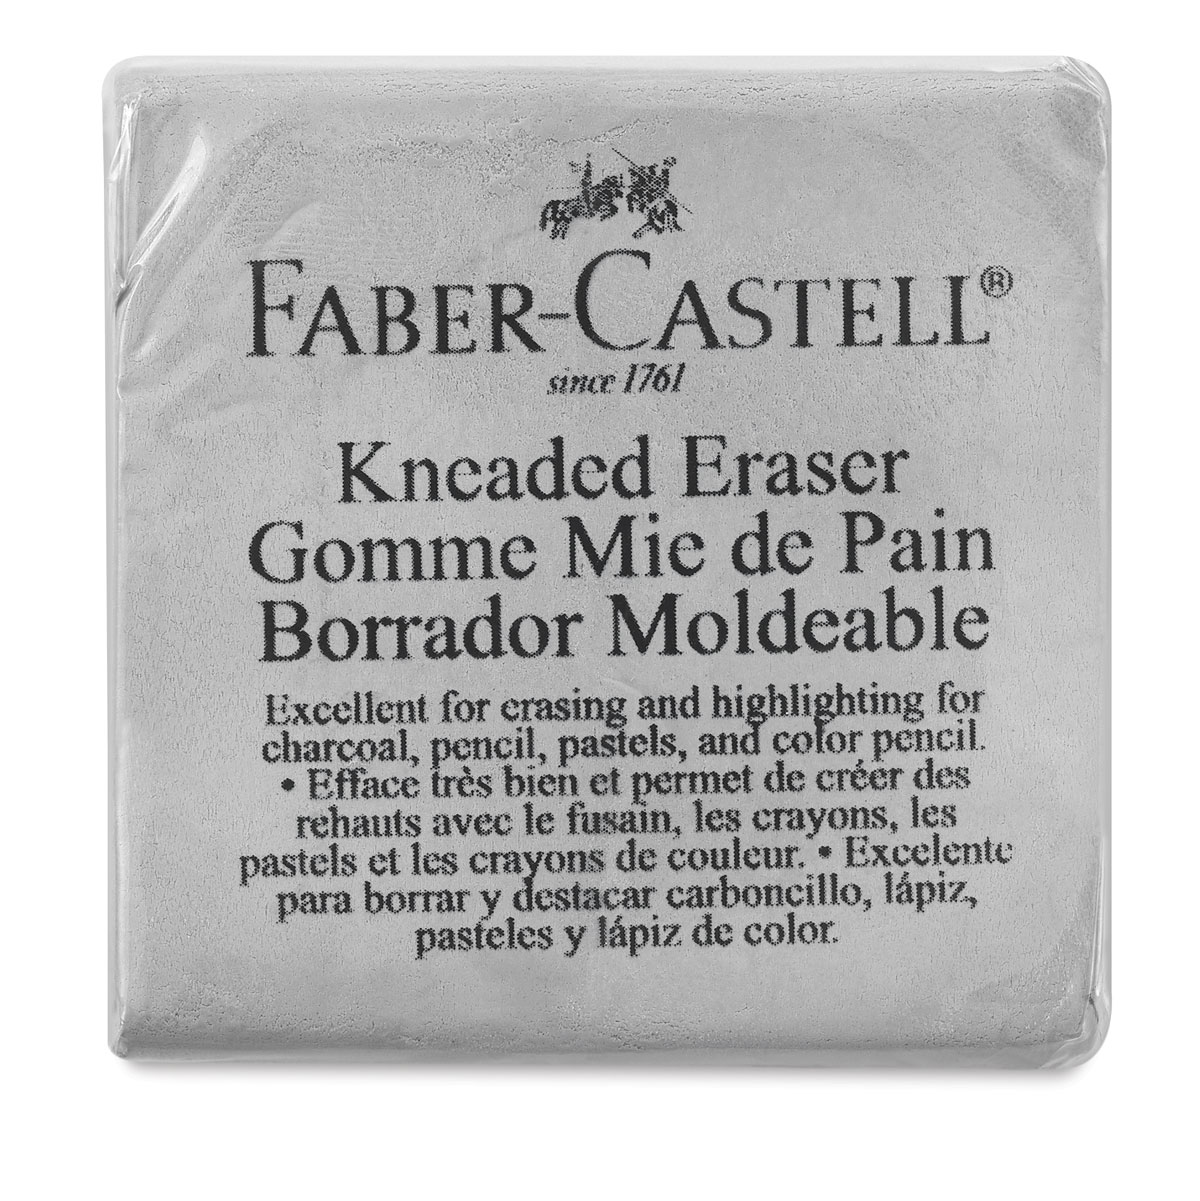 Faber-Castell knead Erasers - Drawing Art kneaded Erasers, Large